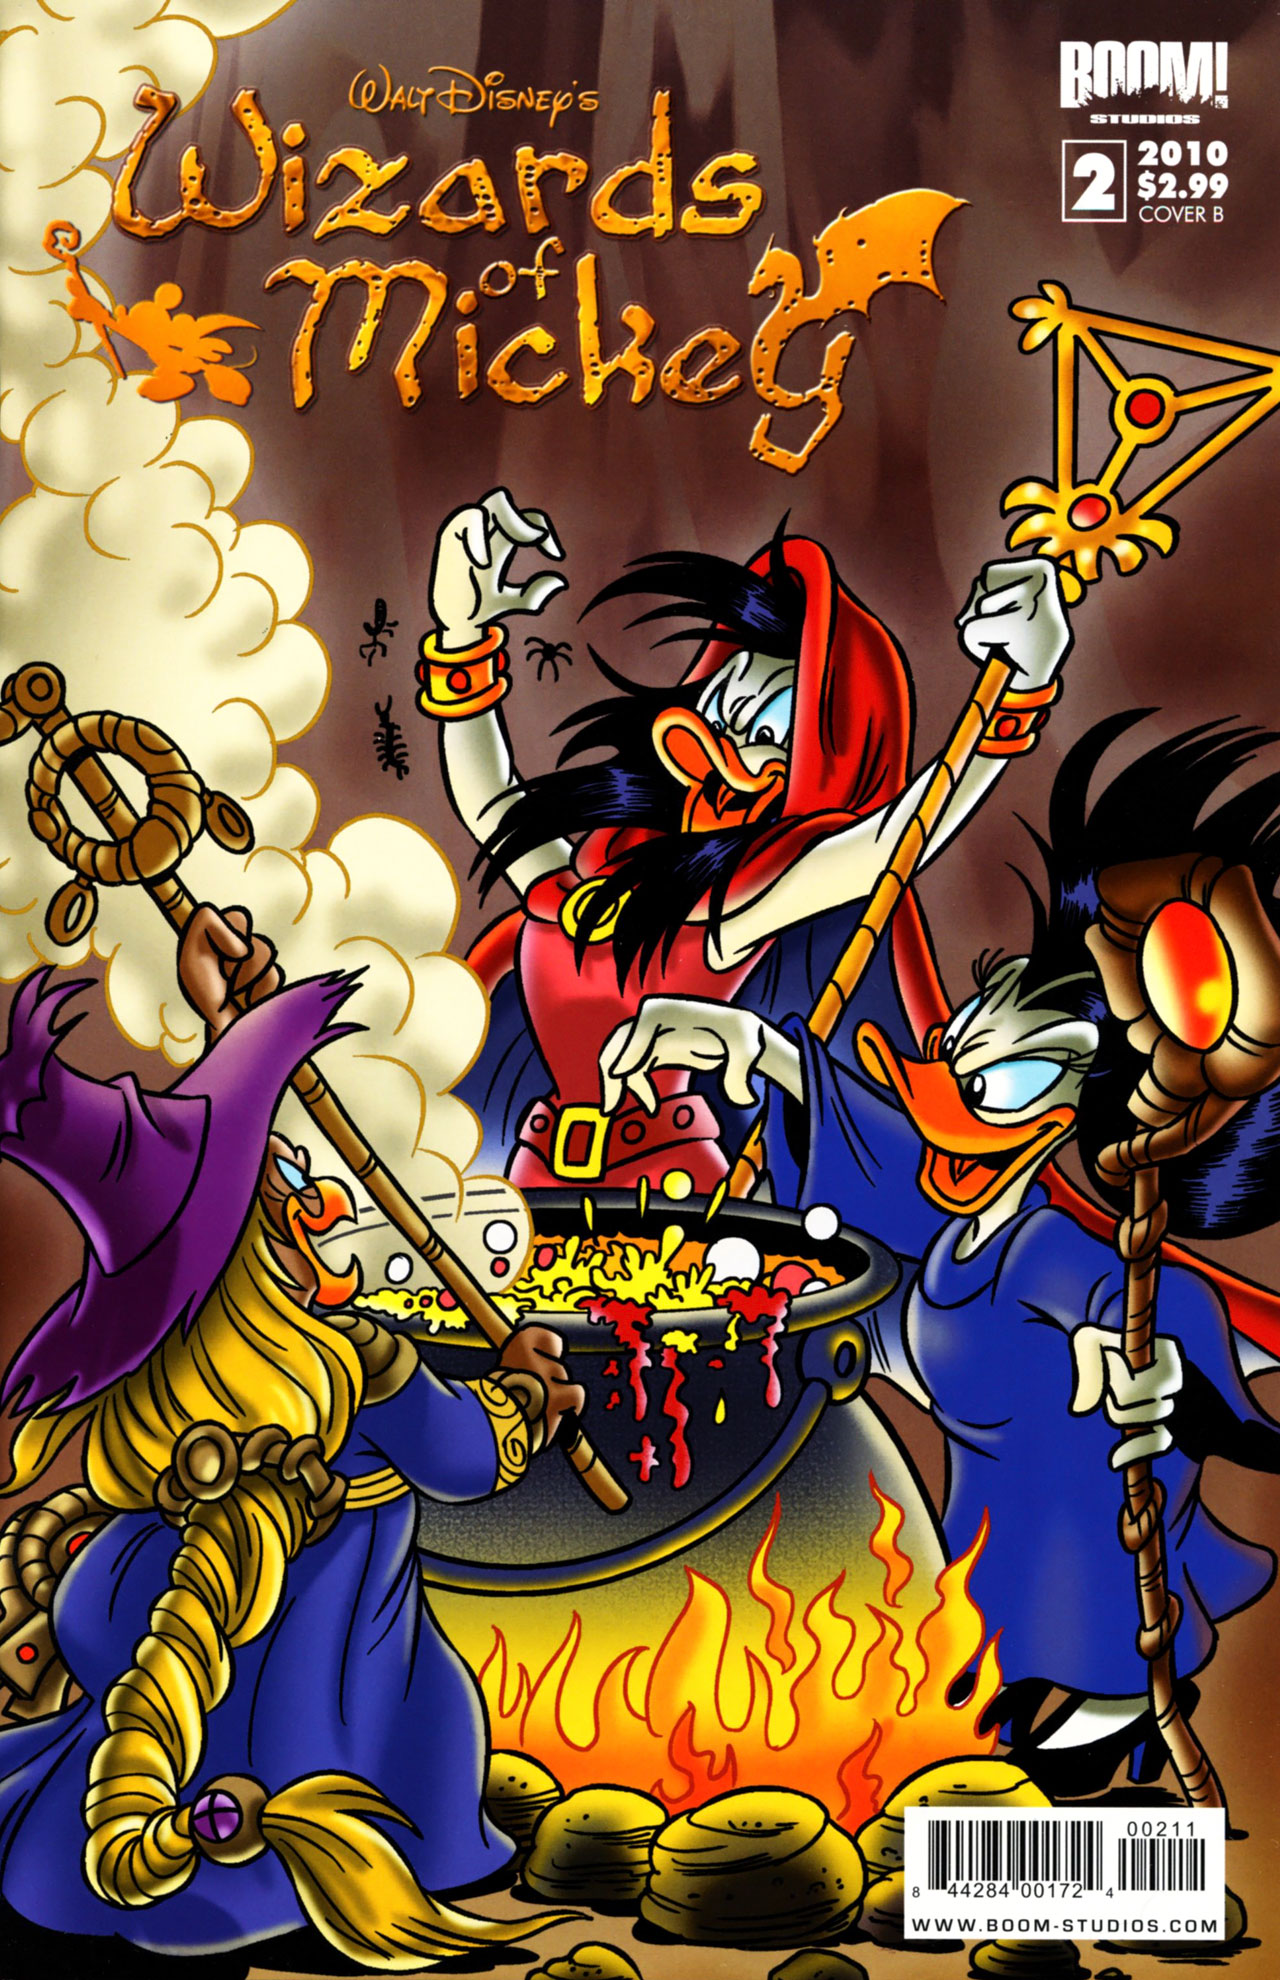 Read online Wizards of Mickey comic -  Issue #2 - 2